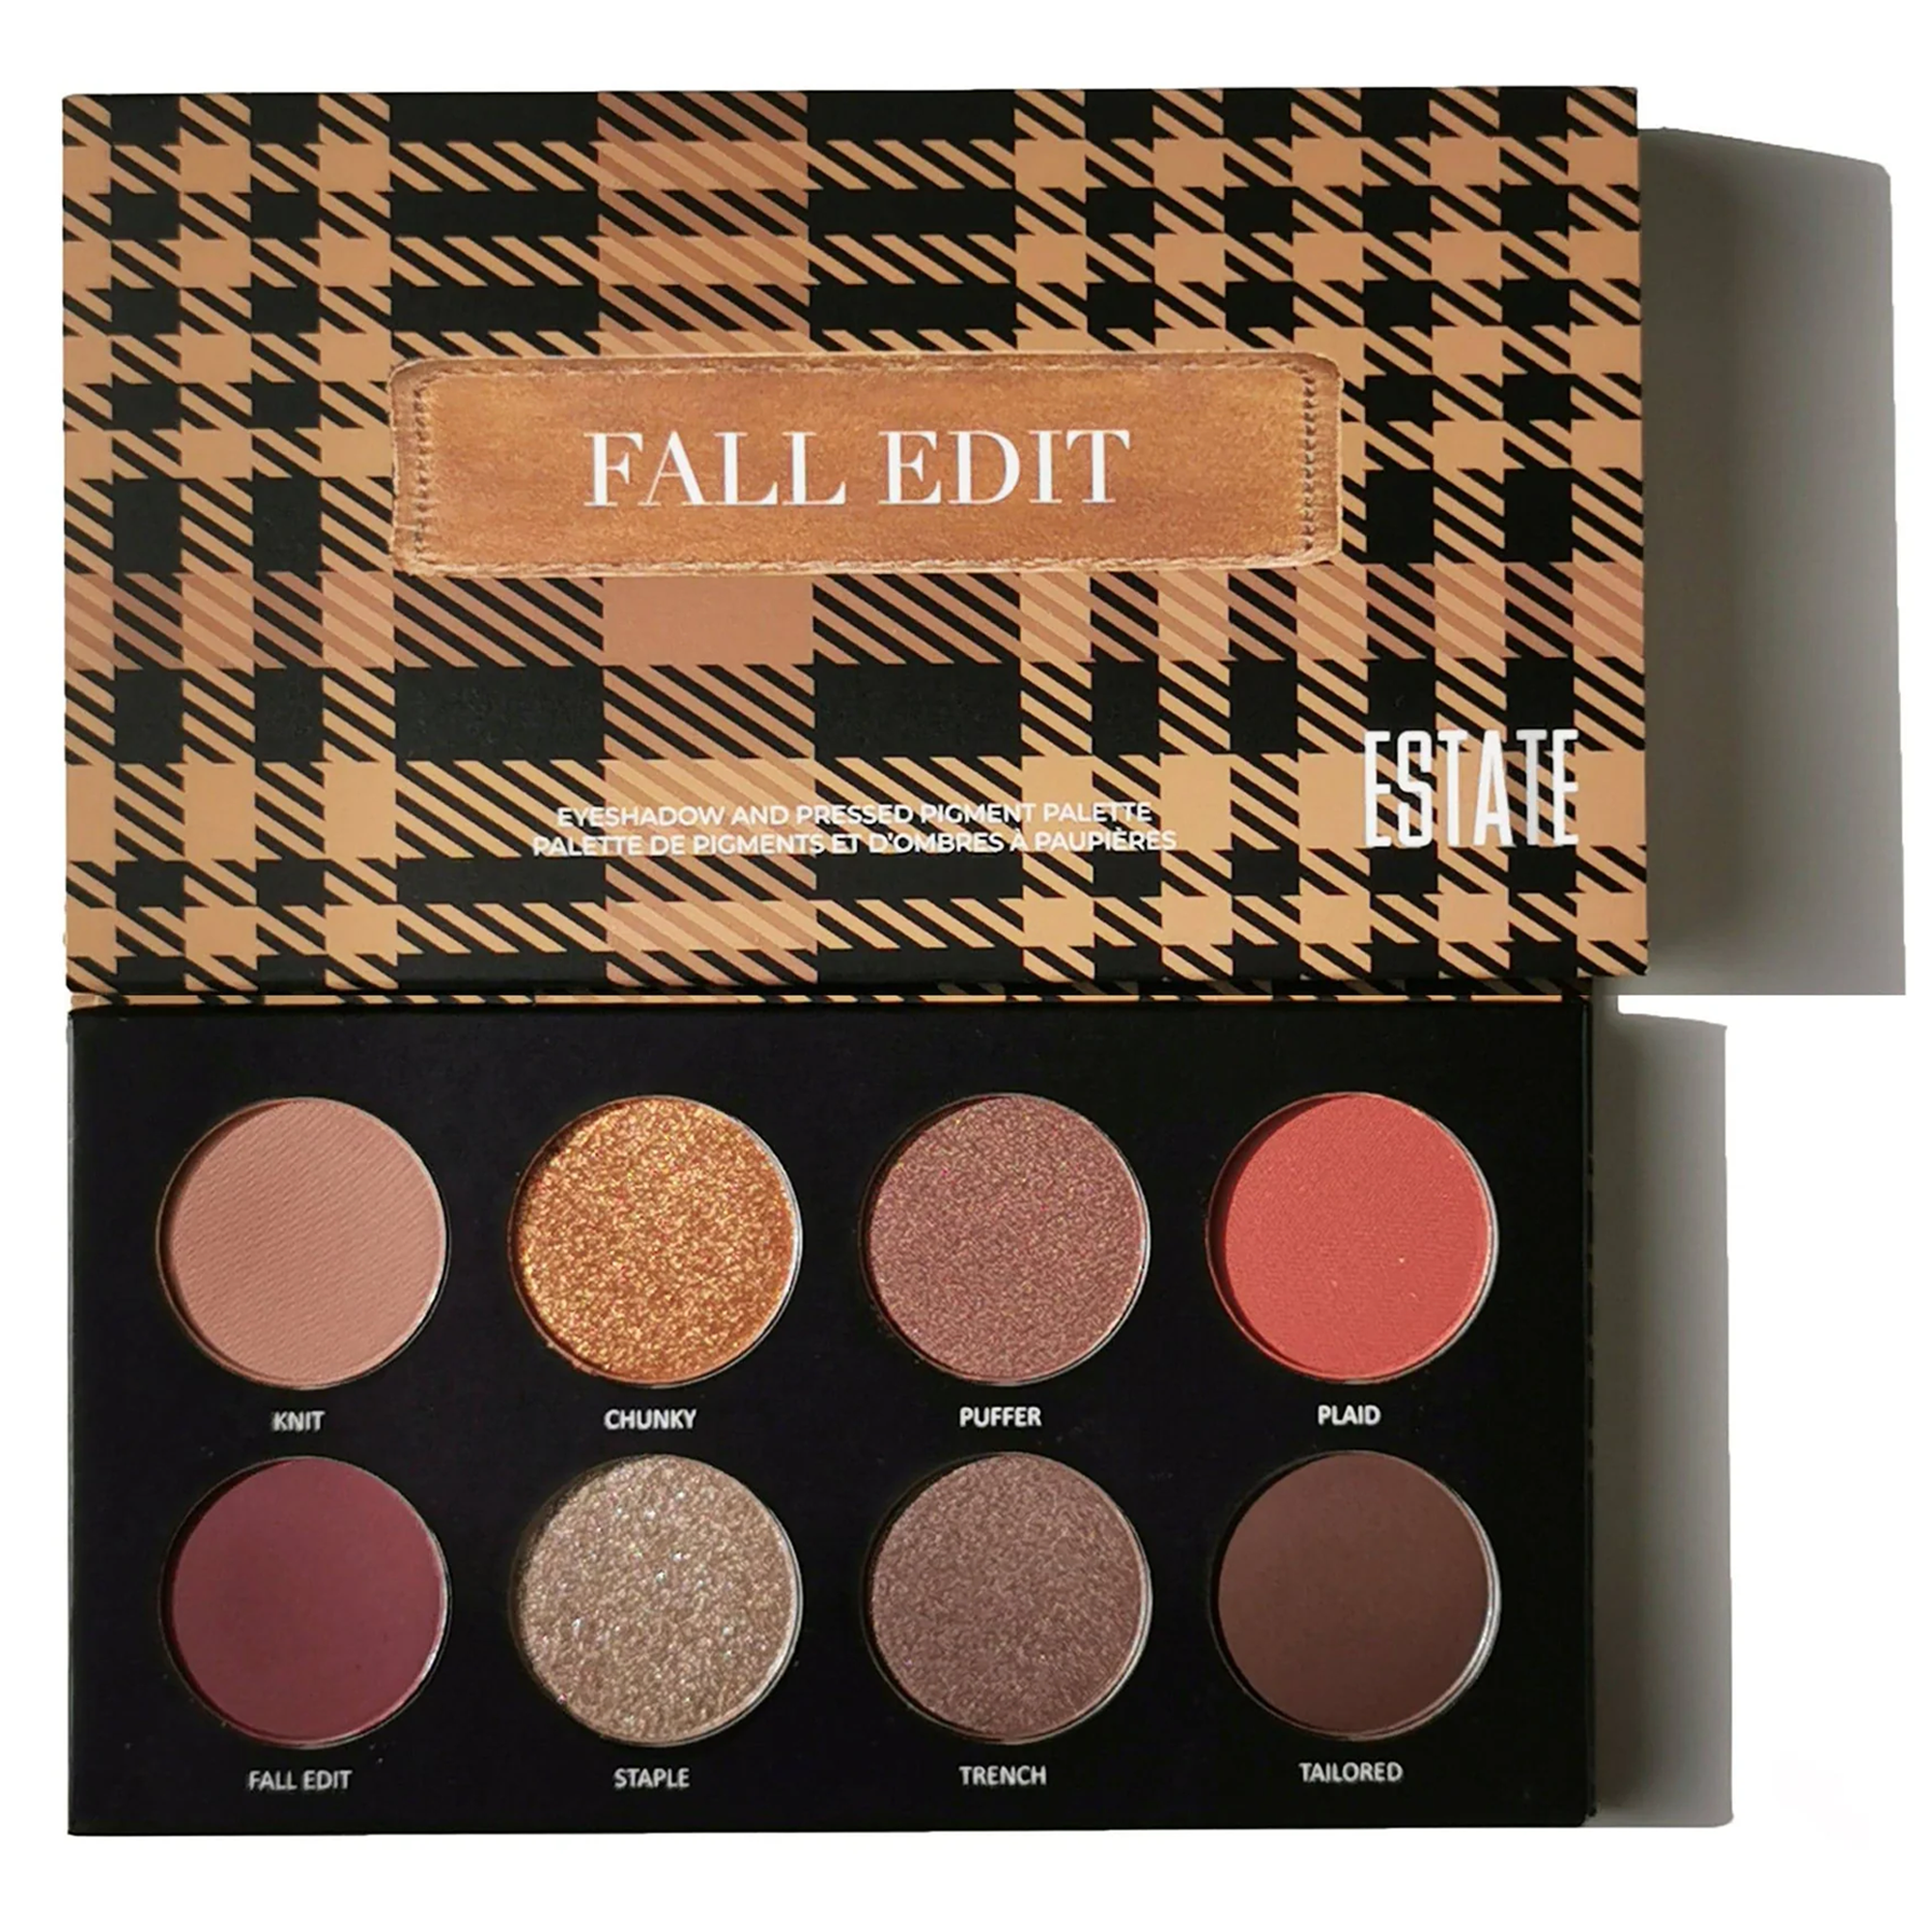 Fall Edit Eyeshadow and Pressed Pigment Palette